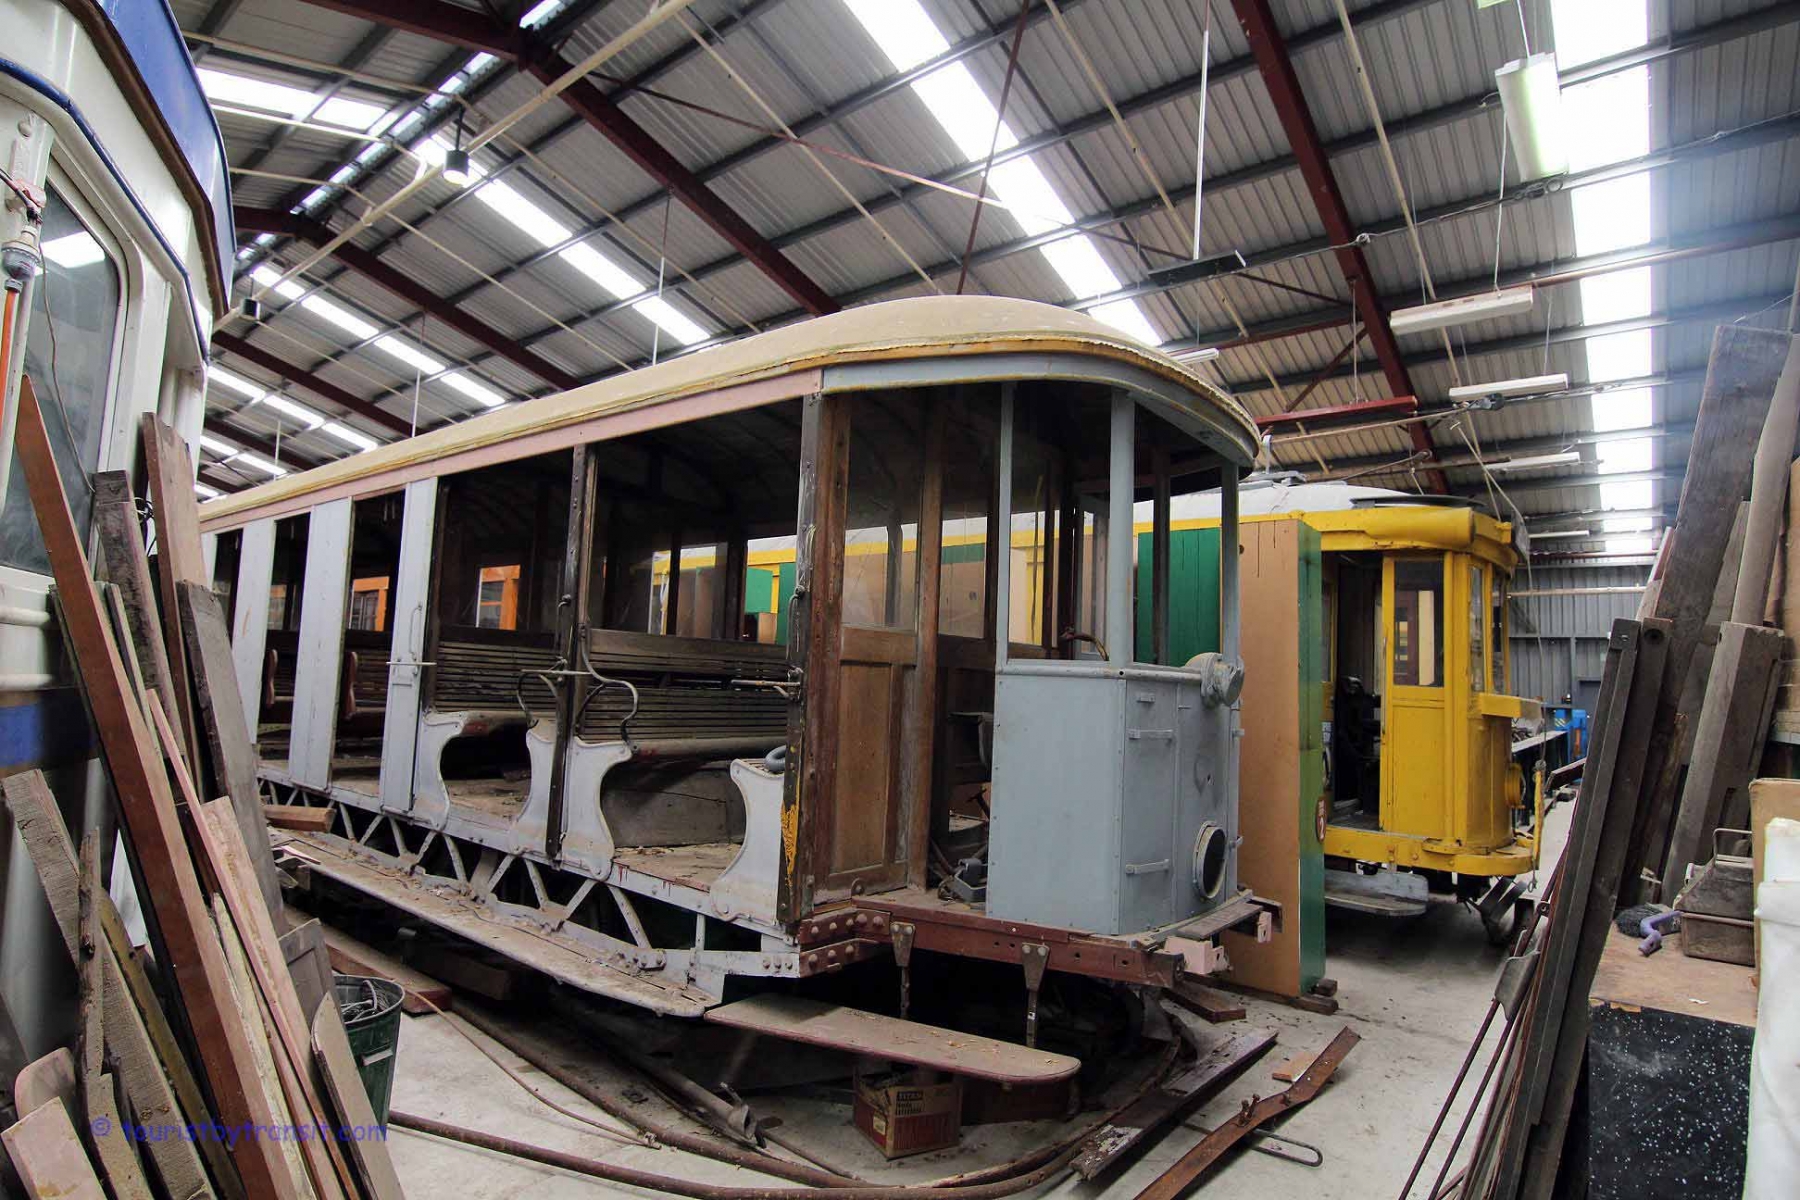 Another O-class tram in restoration